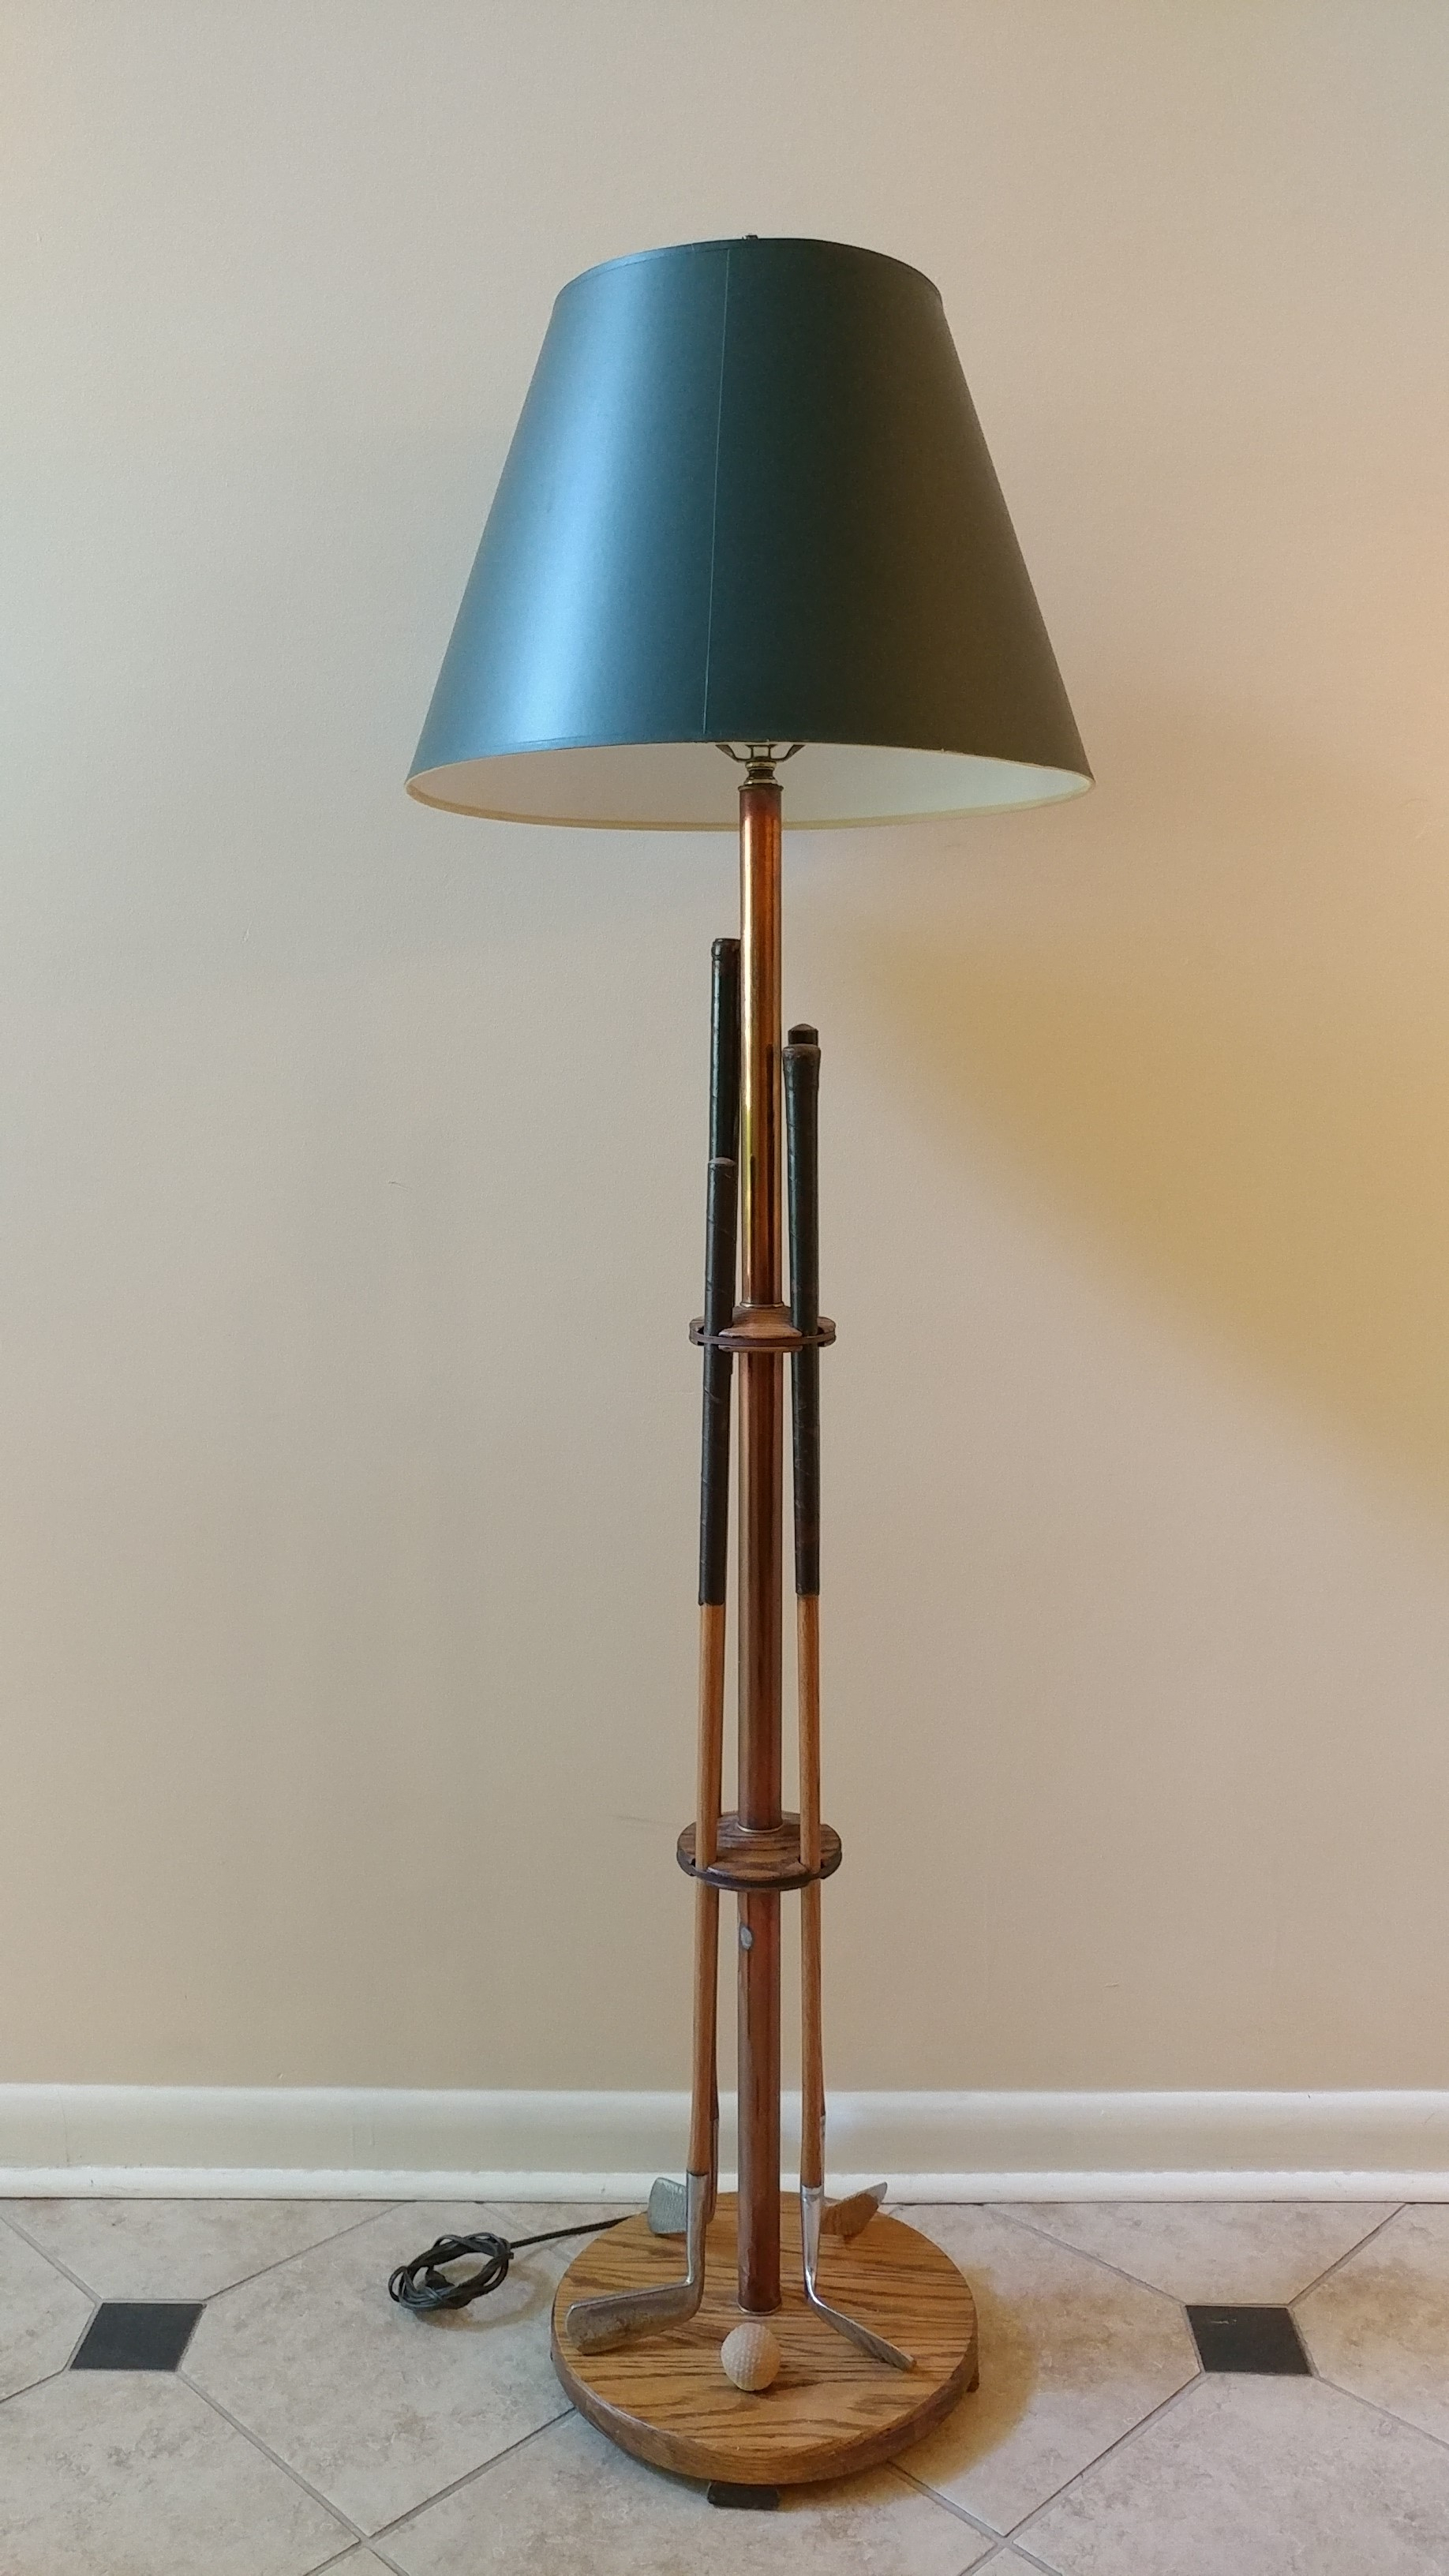 Details About Mid Century Floor Lamp With Vintage Wood Golf Clubs And Ball Copper Shaft in size 1836 X 3264